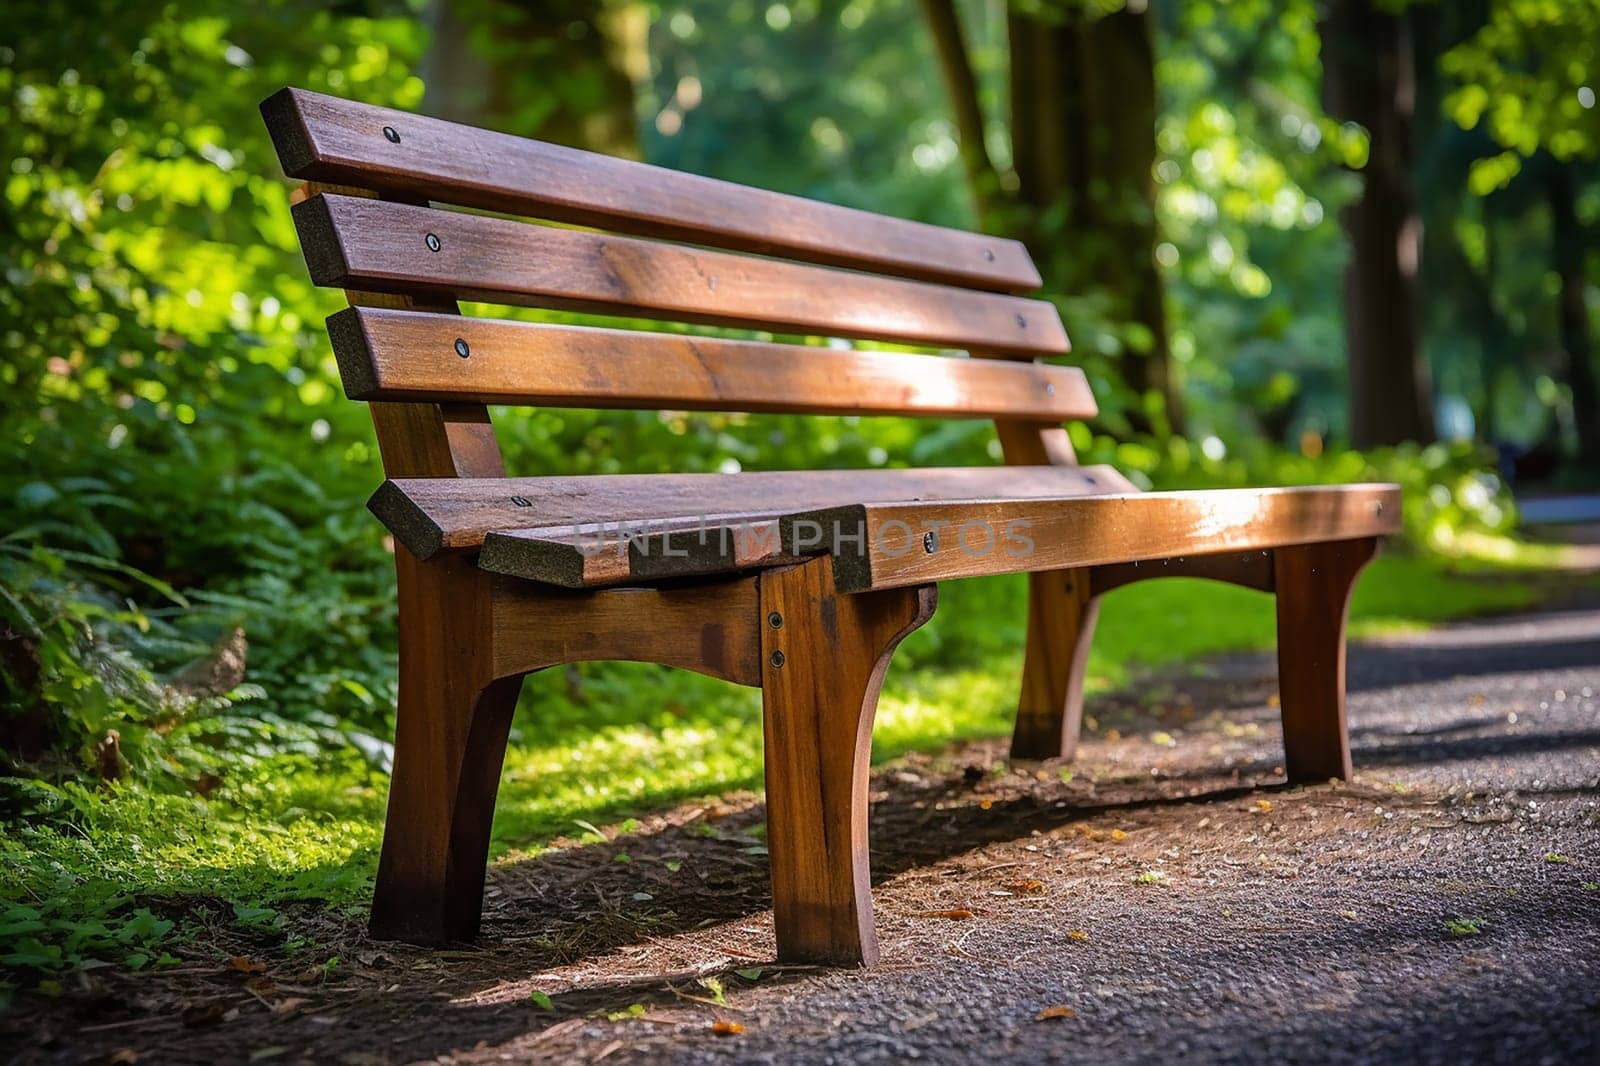 A photo of a bench in a park with tree and grass, bench in a garden on a sunny day outside